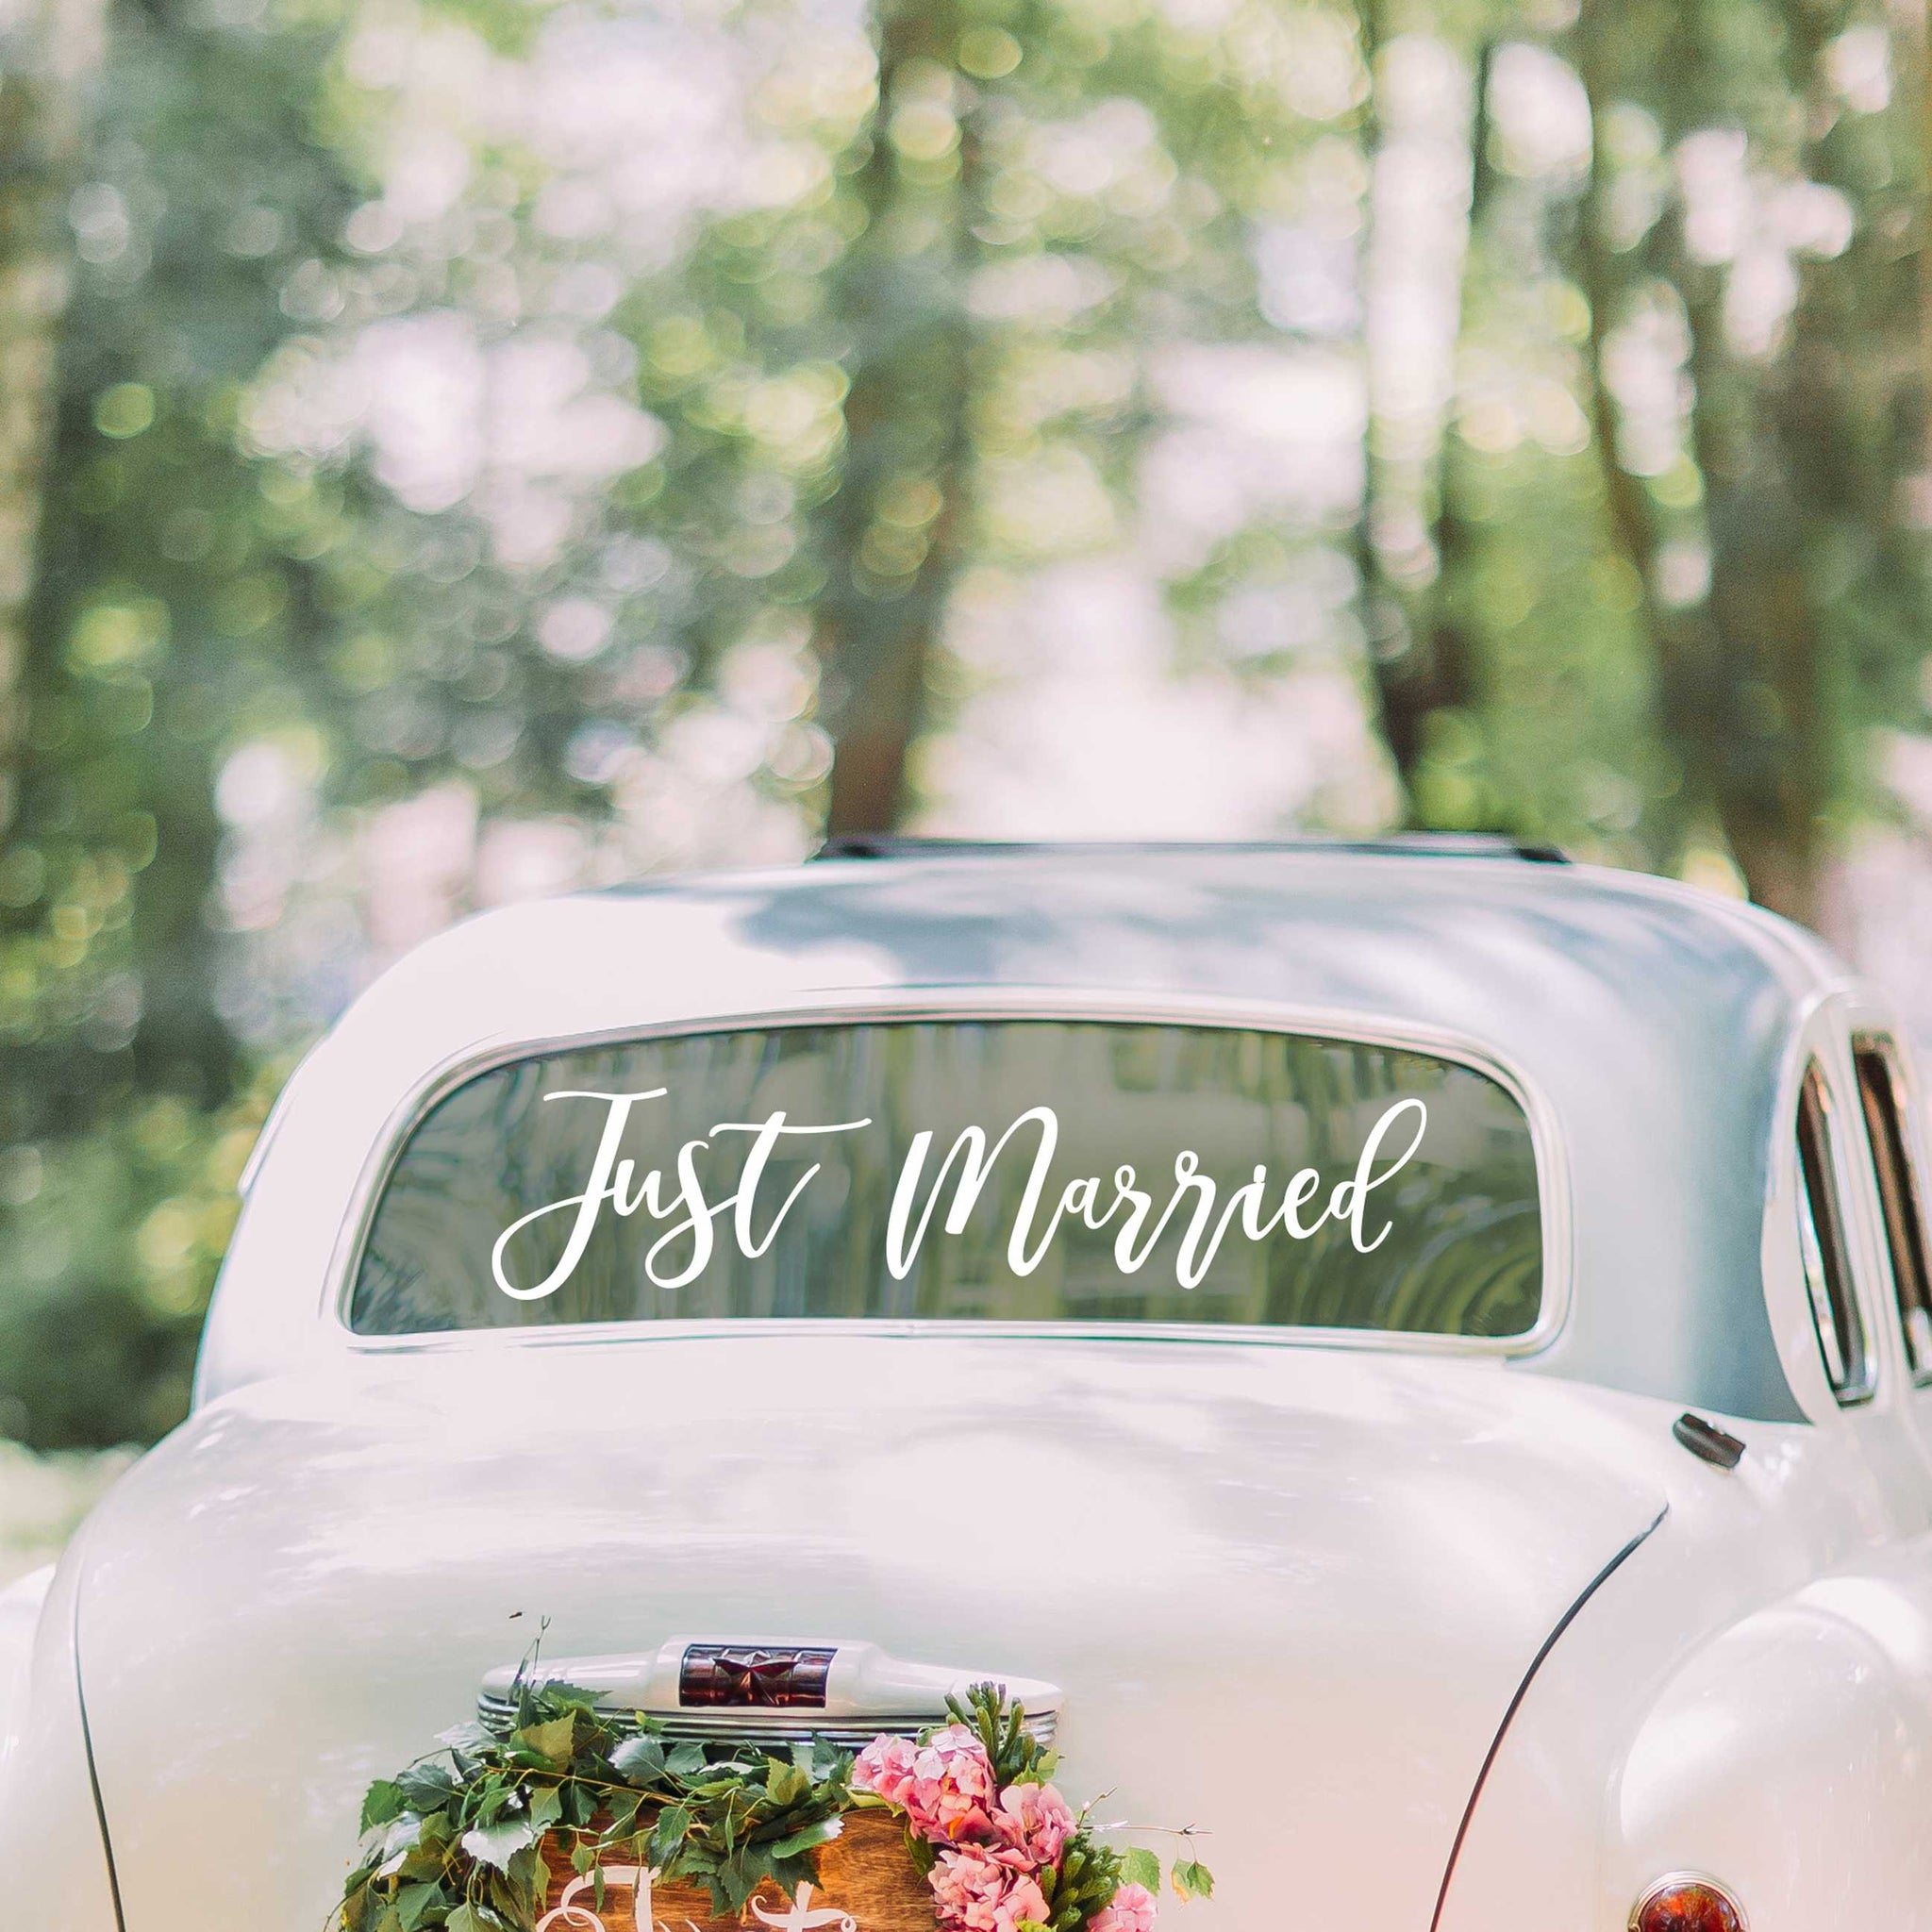 Just Married wedding car window sticker, white sticker that can be easily removed.